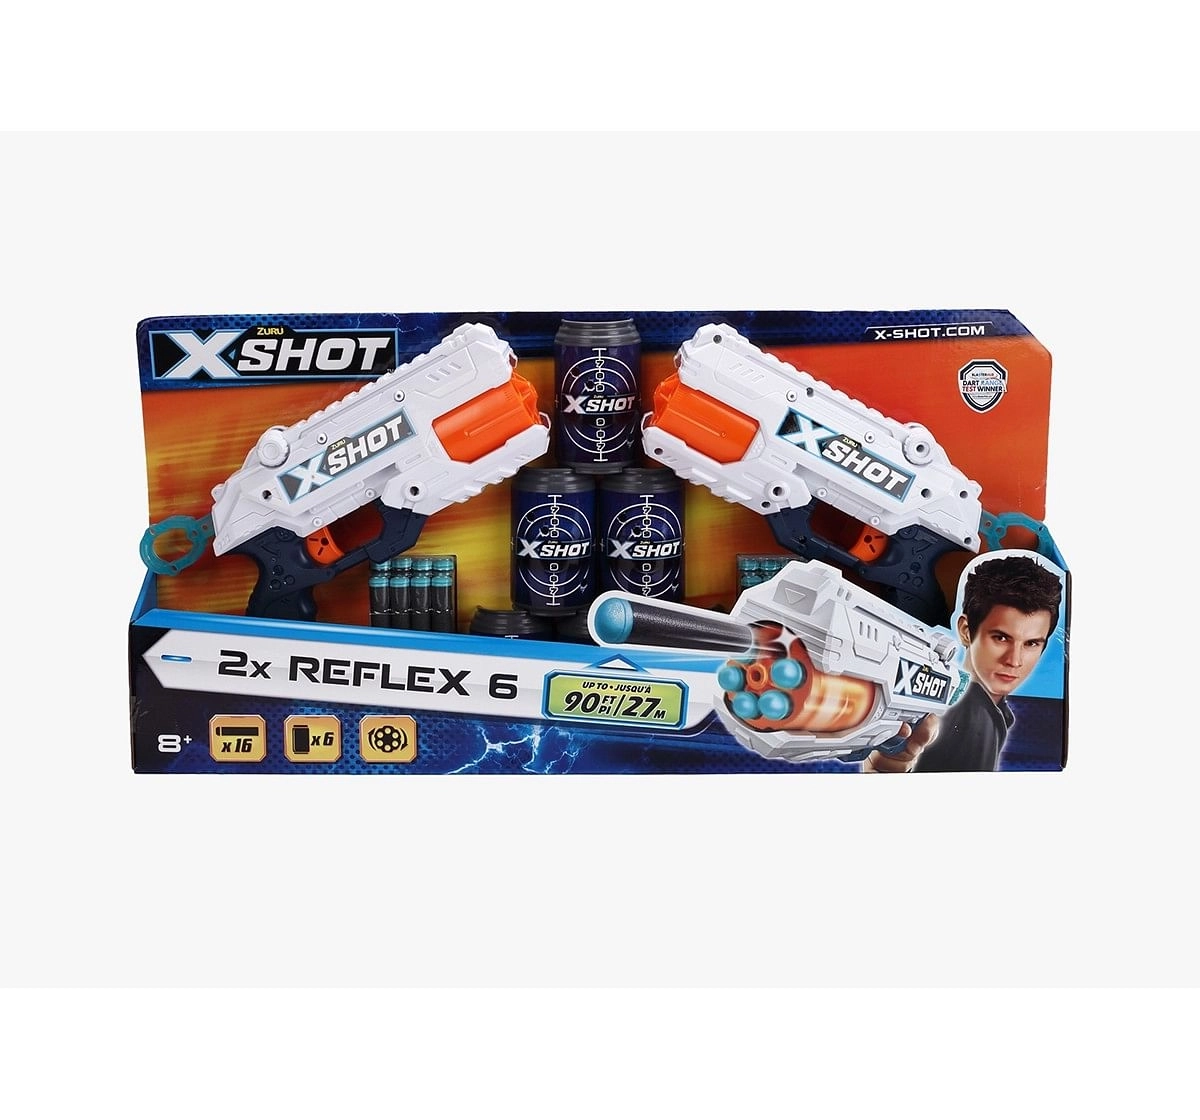 X-Shot Excel Reflex 6 Combo Pack Blasters for Kids age 6Y+ (White)